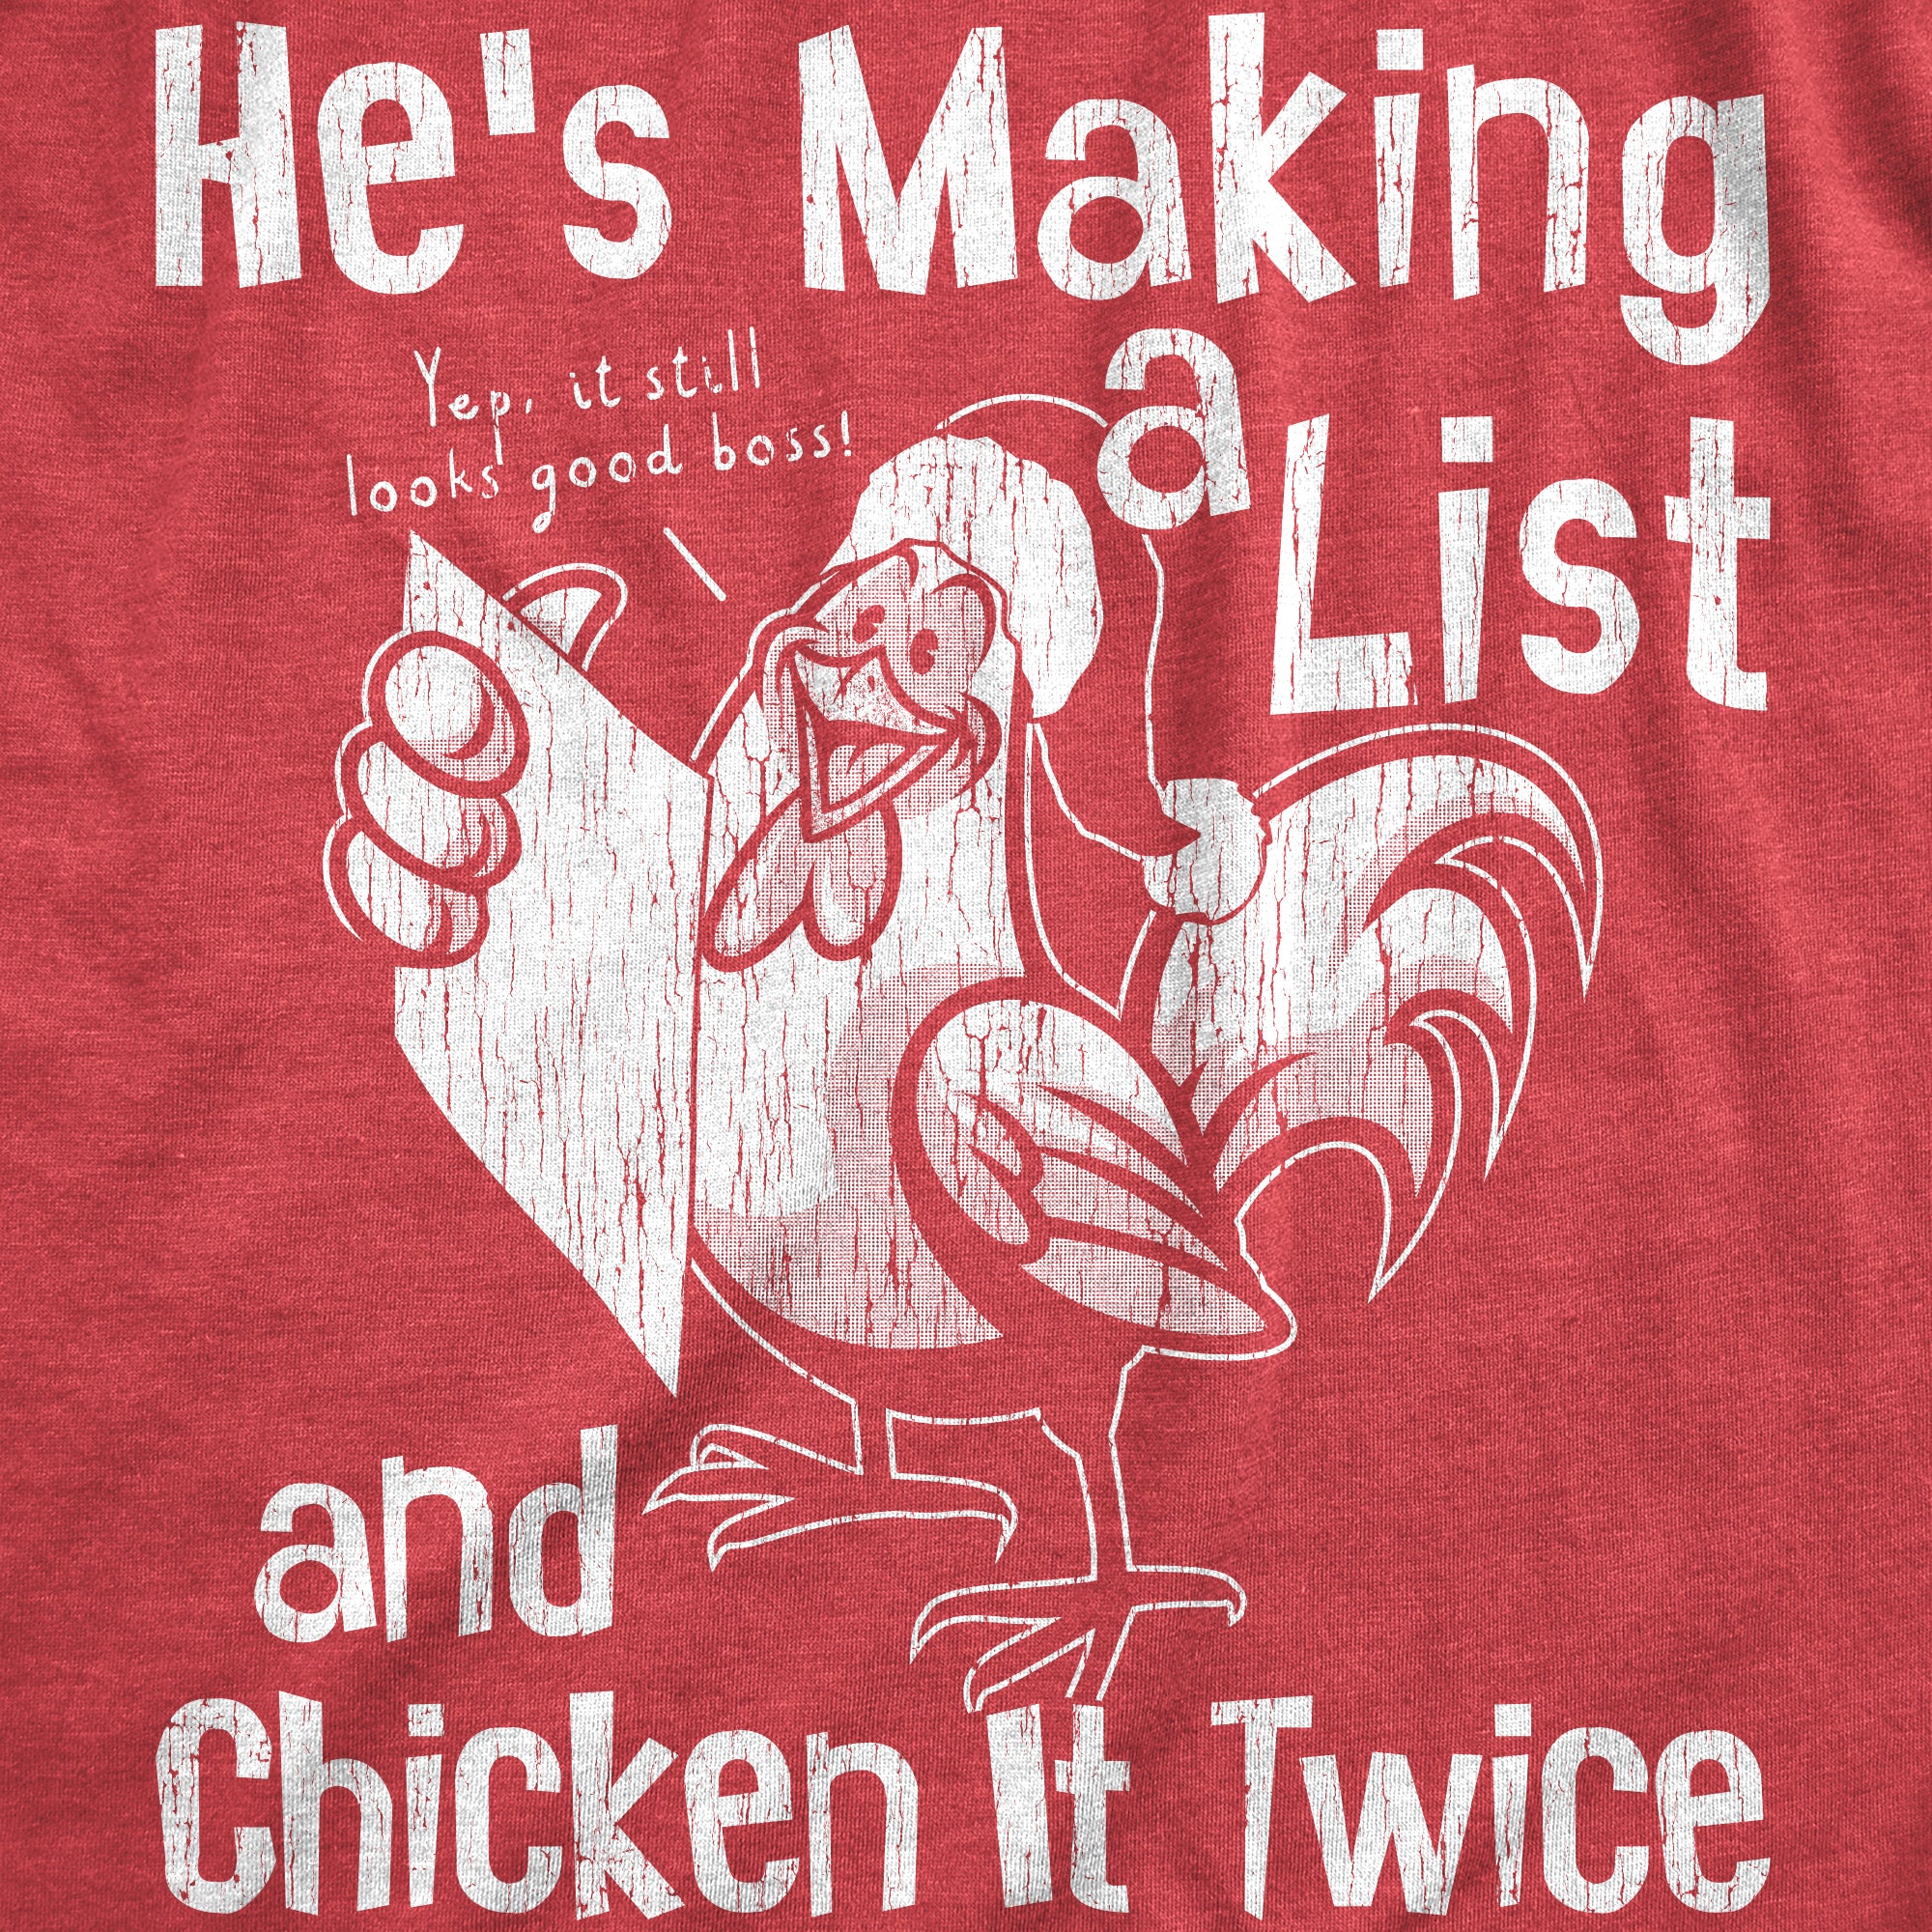 Funny Heather Red - CHICKEN Hes Making A List And Chicken It Twice Mens T Shirt Nerdy Christmas animal sarcastic Tee